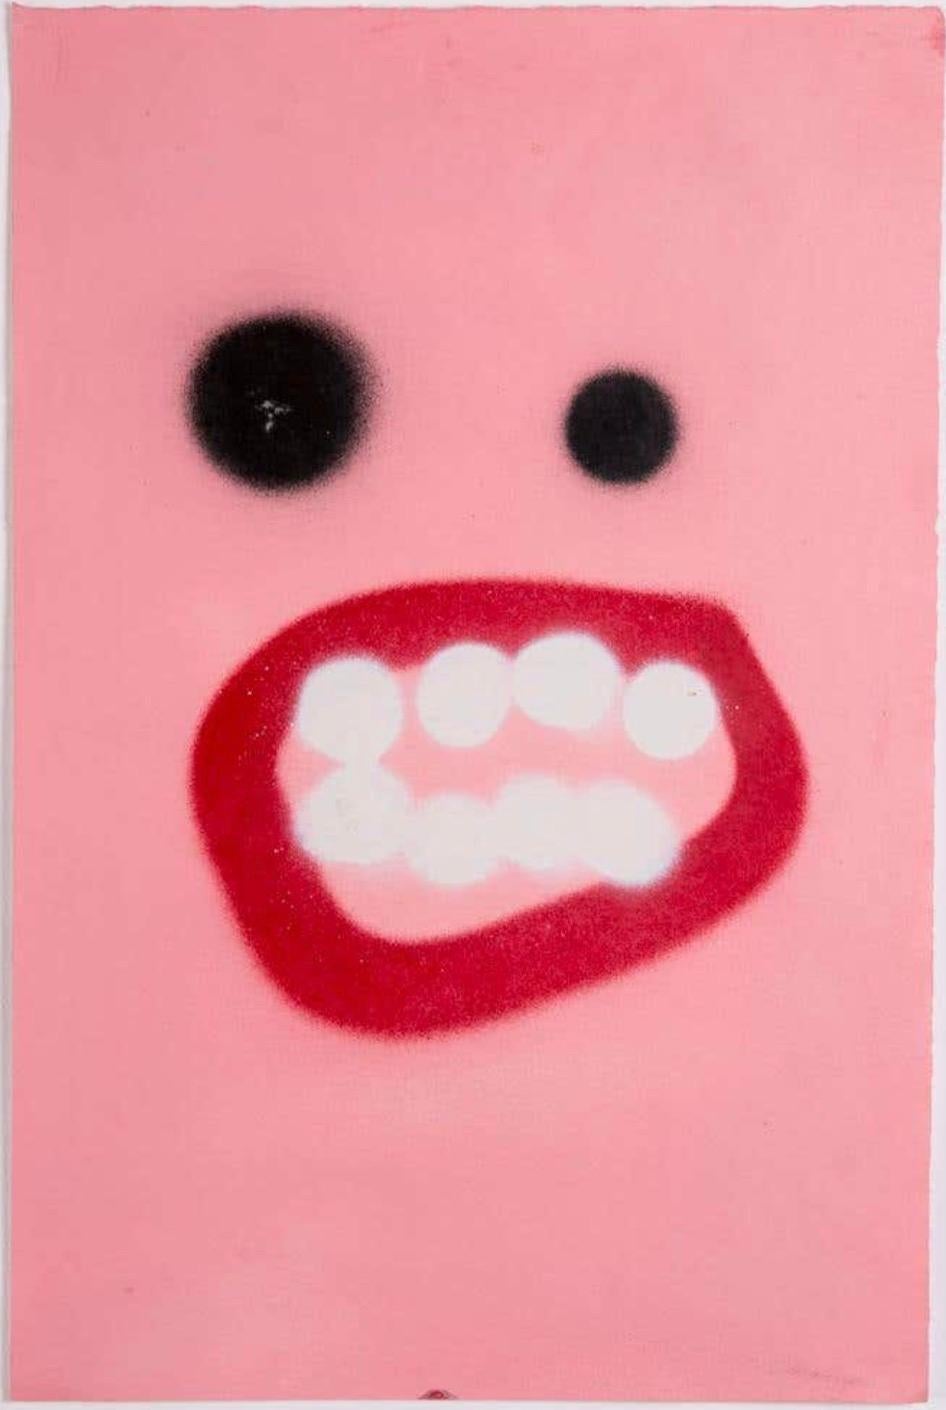 "Hooray Face" is a series of sixteen acrylic and ink drawings on paper by artist Frances Berry.  The series is the artist's take on the "grimace" emoji and is a recurring symbol in her work.  The nervous expression is humorously amplified through